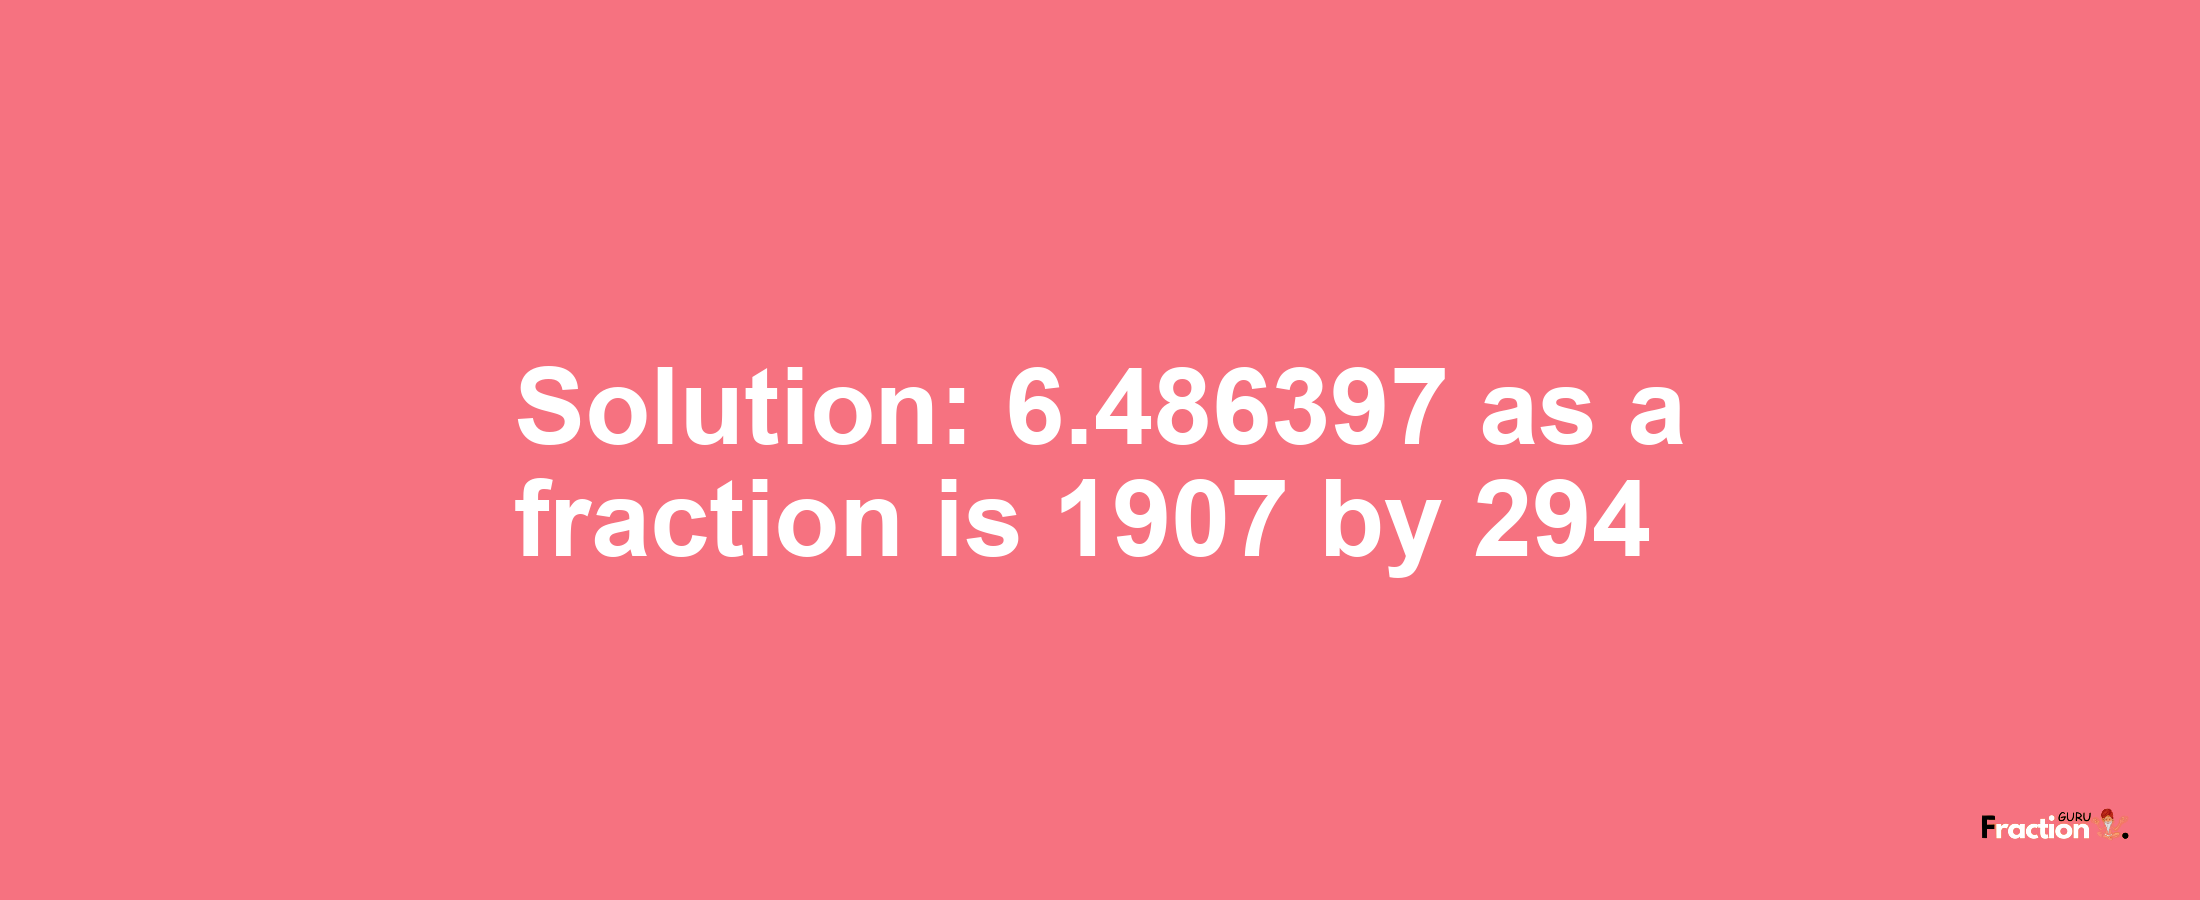 Solution:6.486397 as a fraction is 1907/294